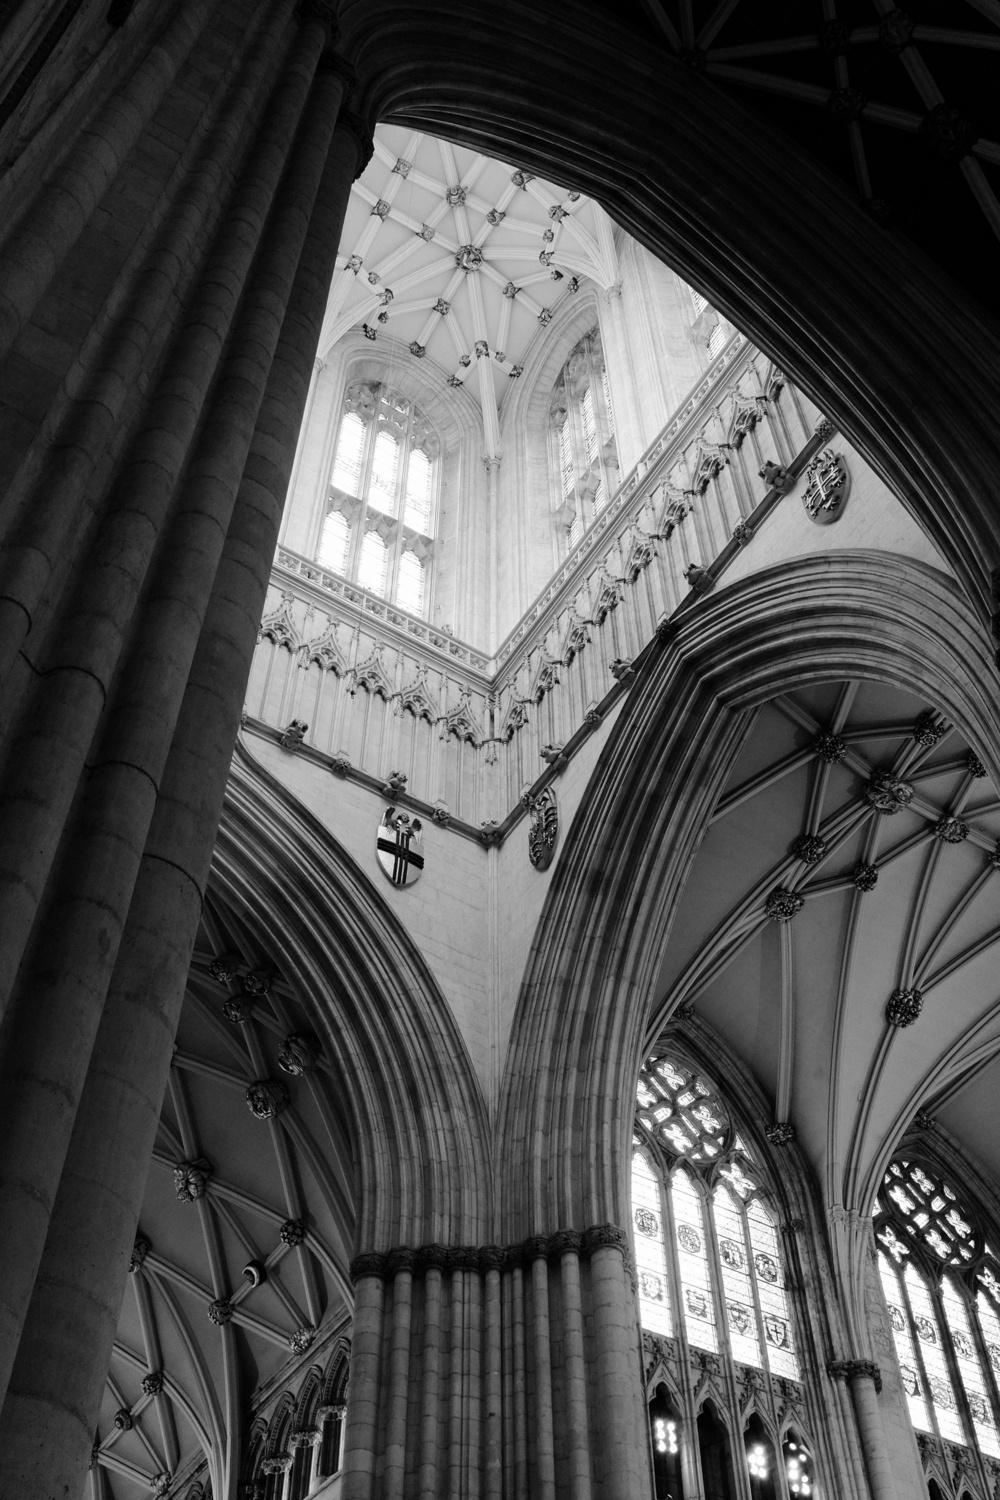 Looking up from beneath the darkness of the Gothic arches, the gaze rests on the light and airy heights of the cathedral.